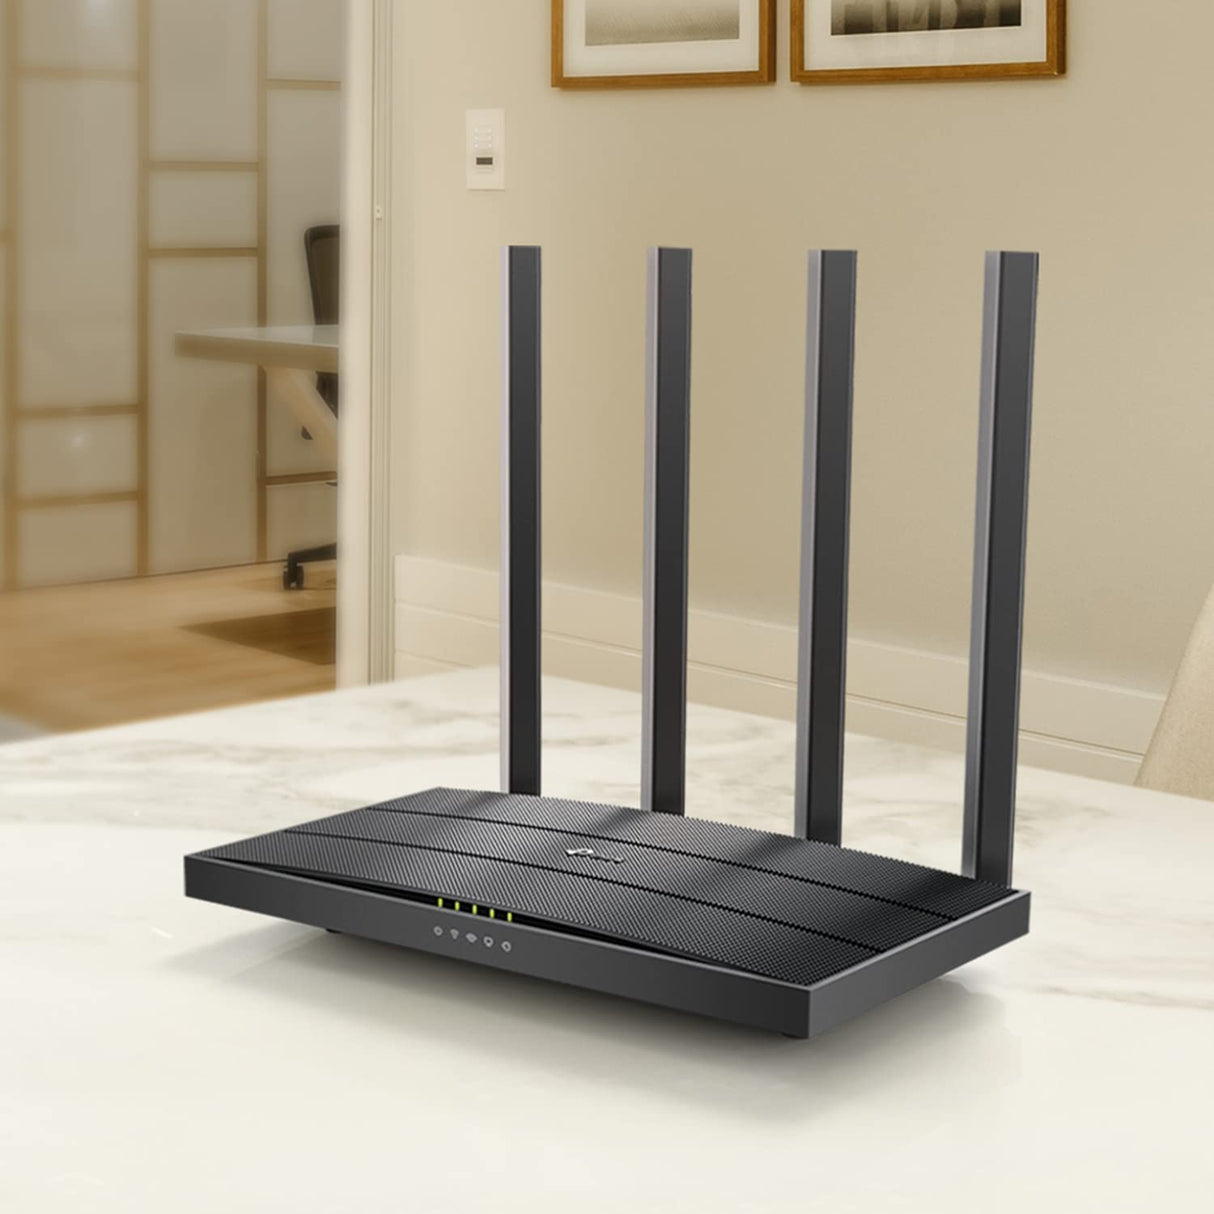 TP-Link AC1200 Gigabit WiFi Router (Archer A6 V3) - Dual Band MU-MIMO Wireless Internet Router, 4 x Antennas, OneMesh and AP mode, Long Range Coverage AC1200 WiFi Router(New Version)